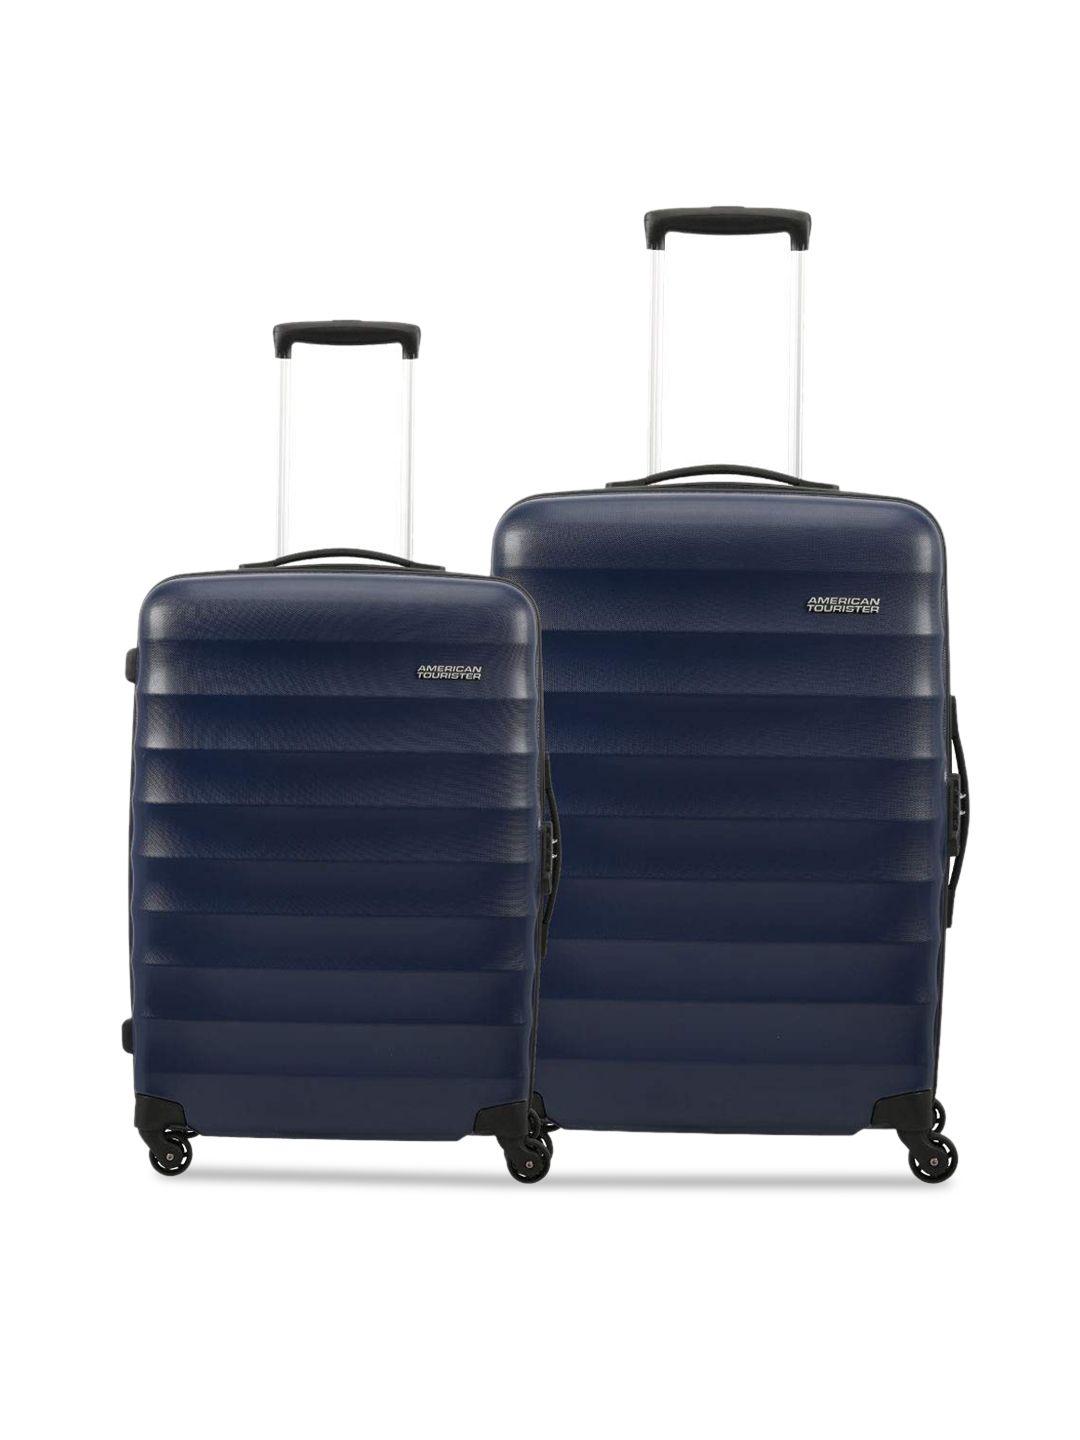 american-tourister-set-of-2-blue-solid-hard-sided-trolley-bag